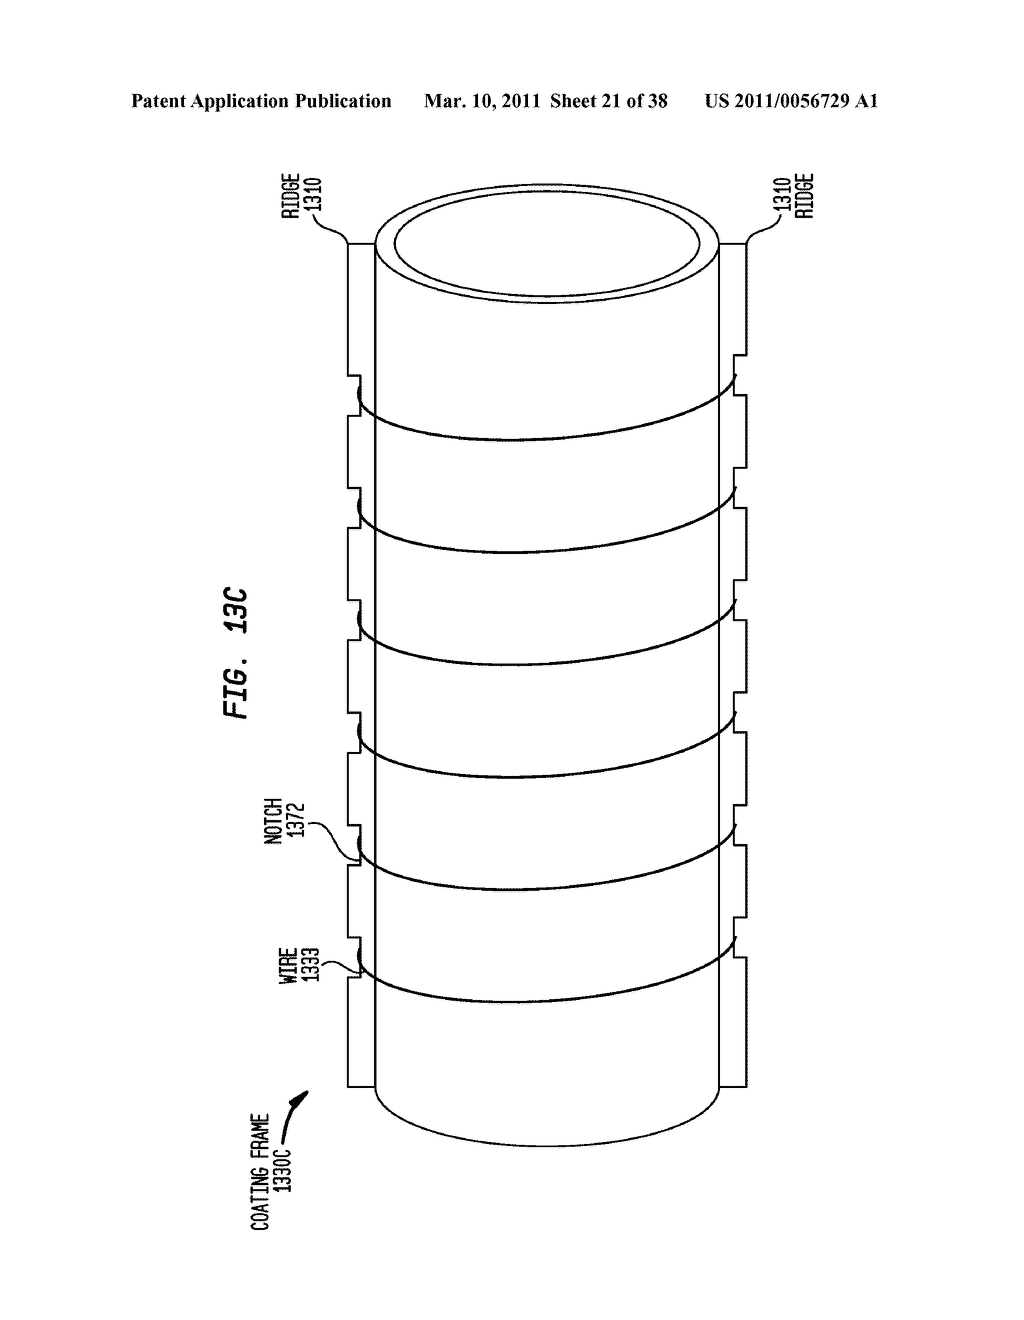 INSULATED CONDUCTIVE ELEMENT HAVING A SUBSTANTIALLY CONTINUOUS BARRIER LAYER FORMED THROUGH CONTINUOUS VAPOR DEPOSITION - diagram, schematic, and image 22